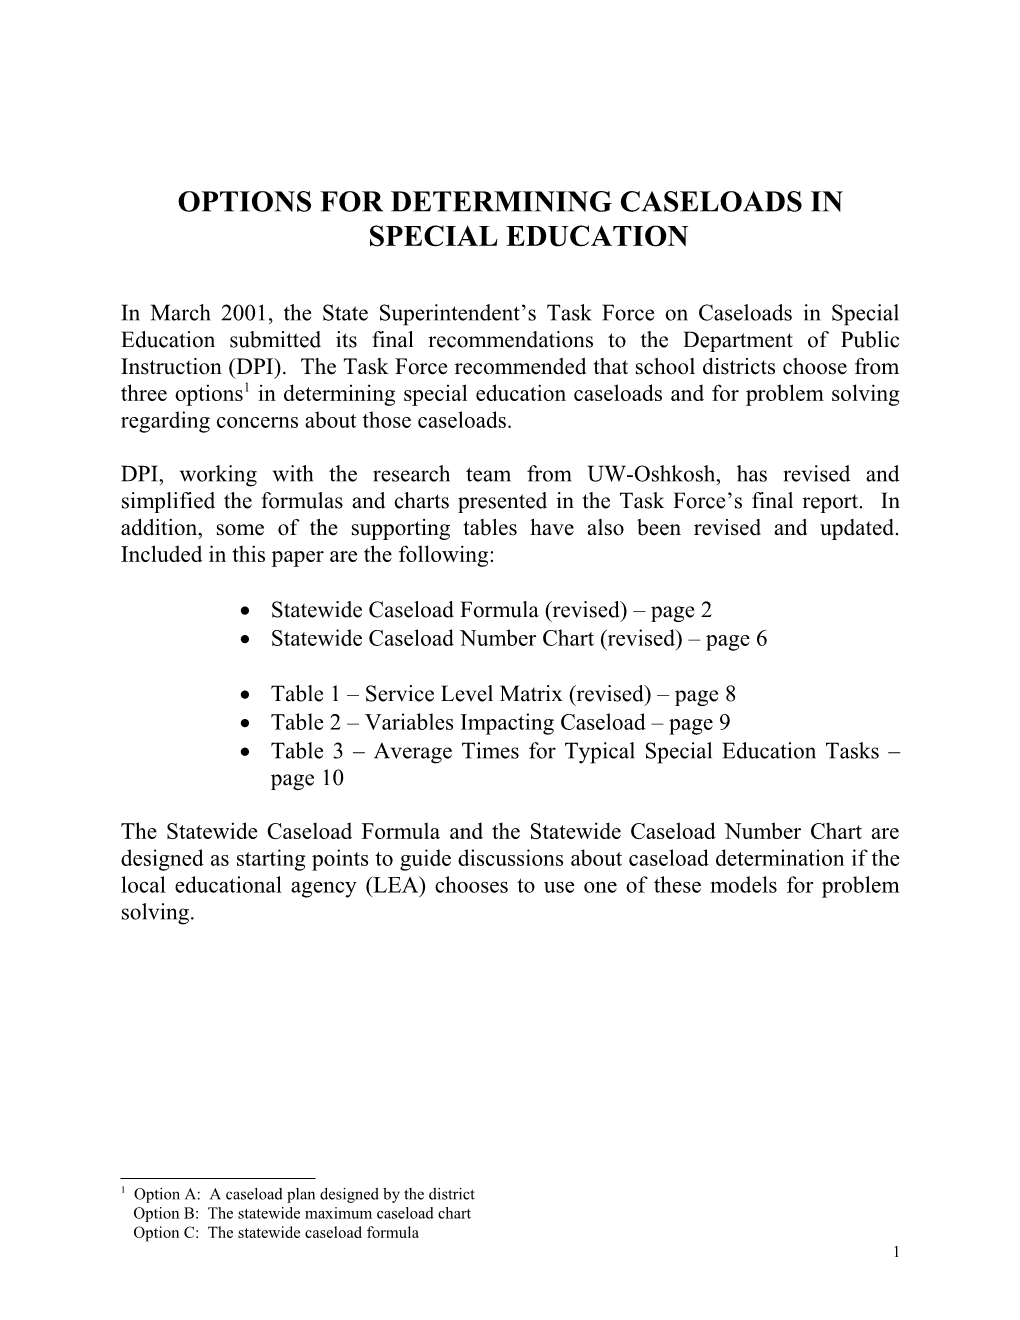 Options for Determining Caseloads in Special Education